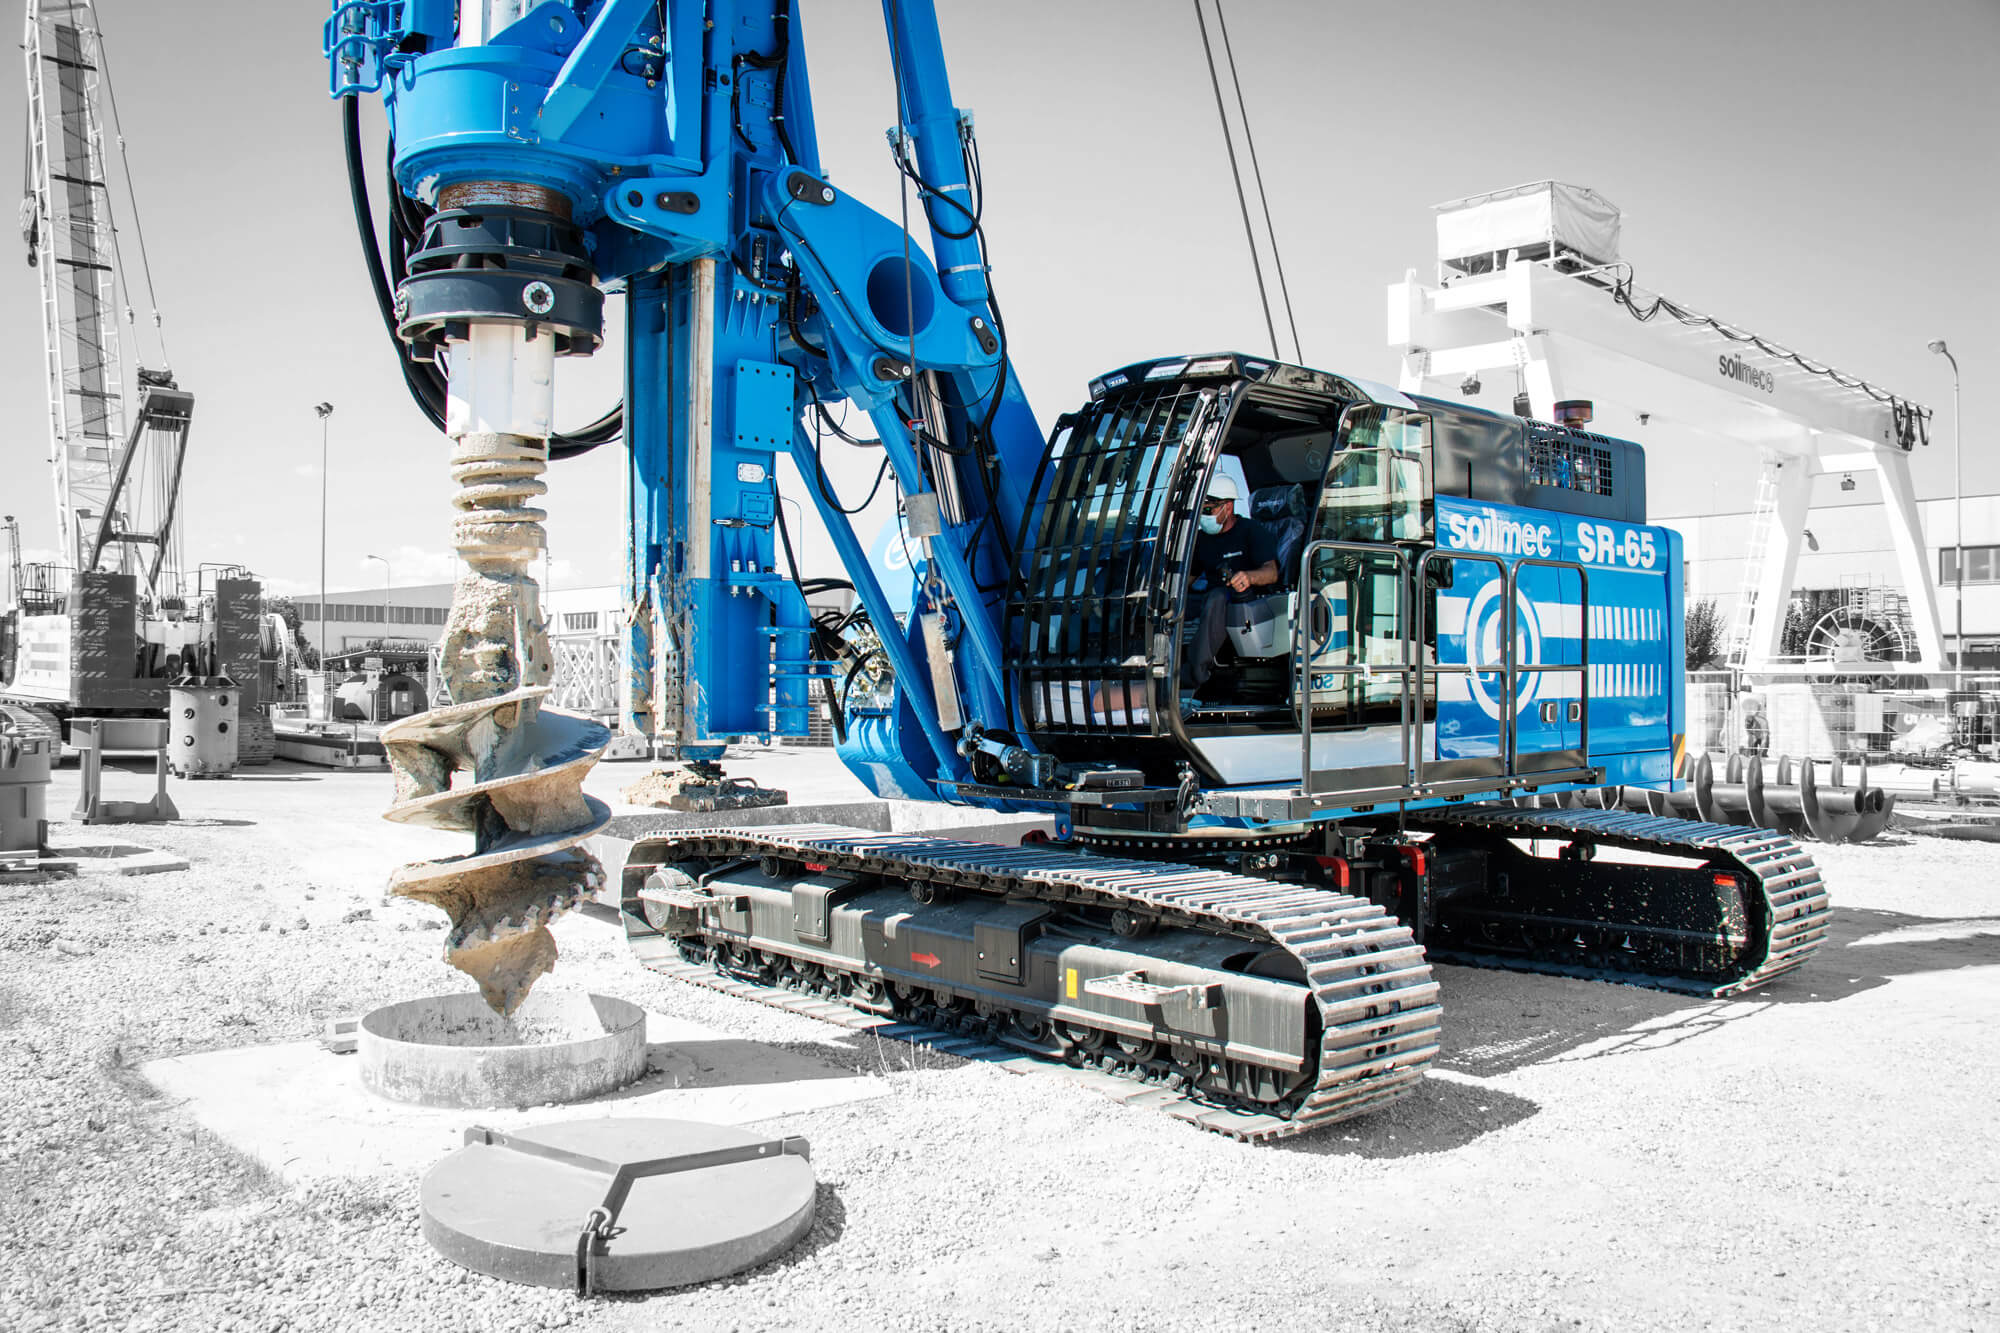 Soilmec SR-65 Drilling a hole in the ground